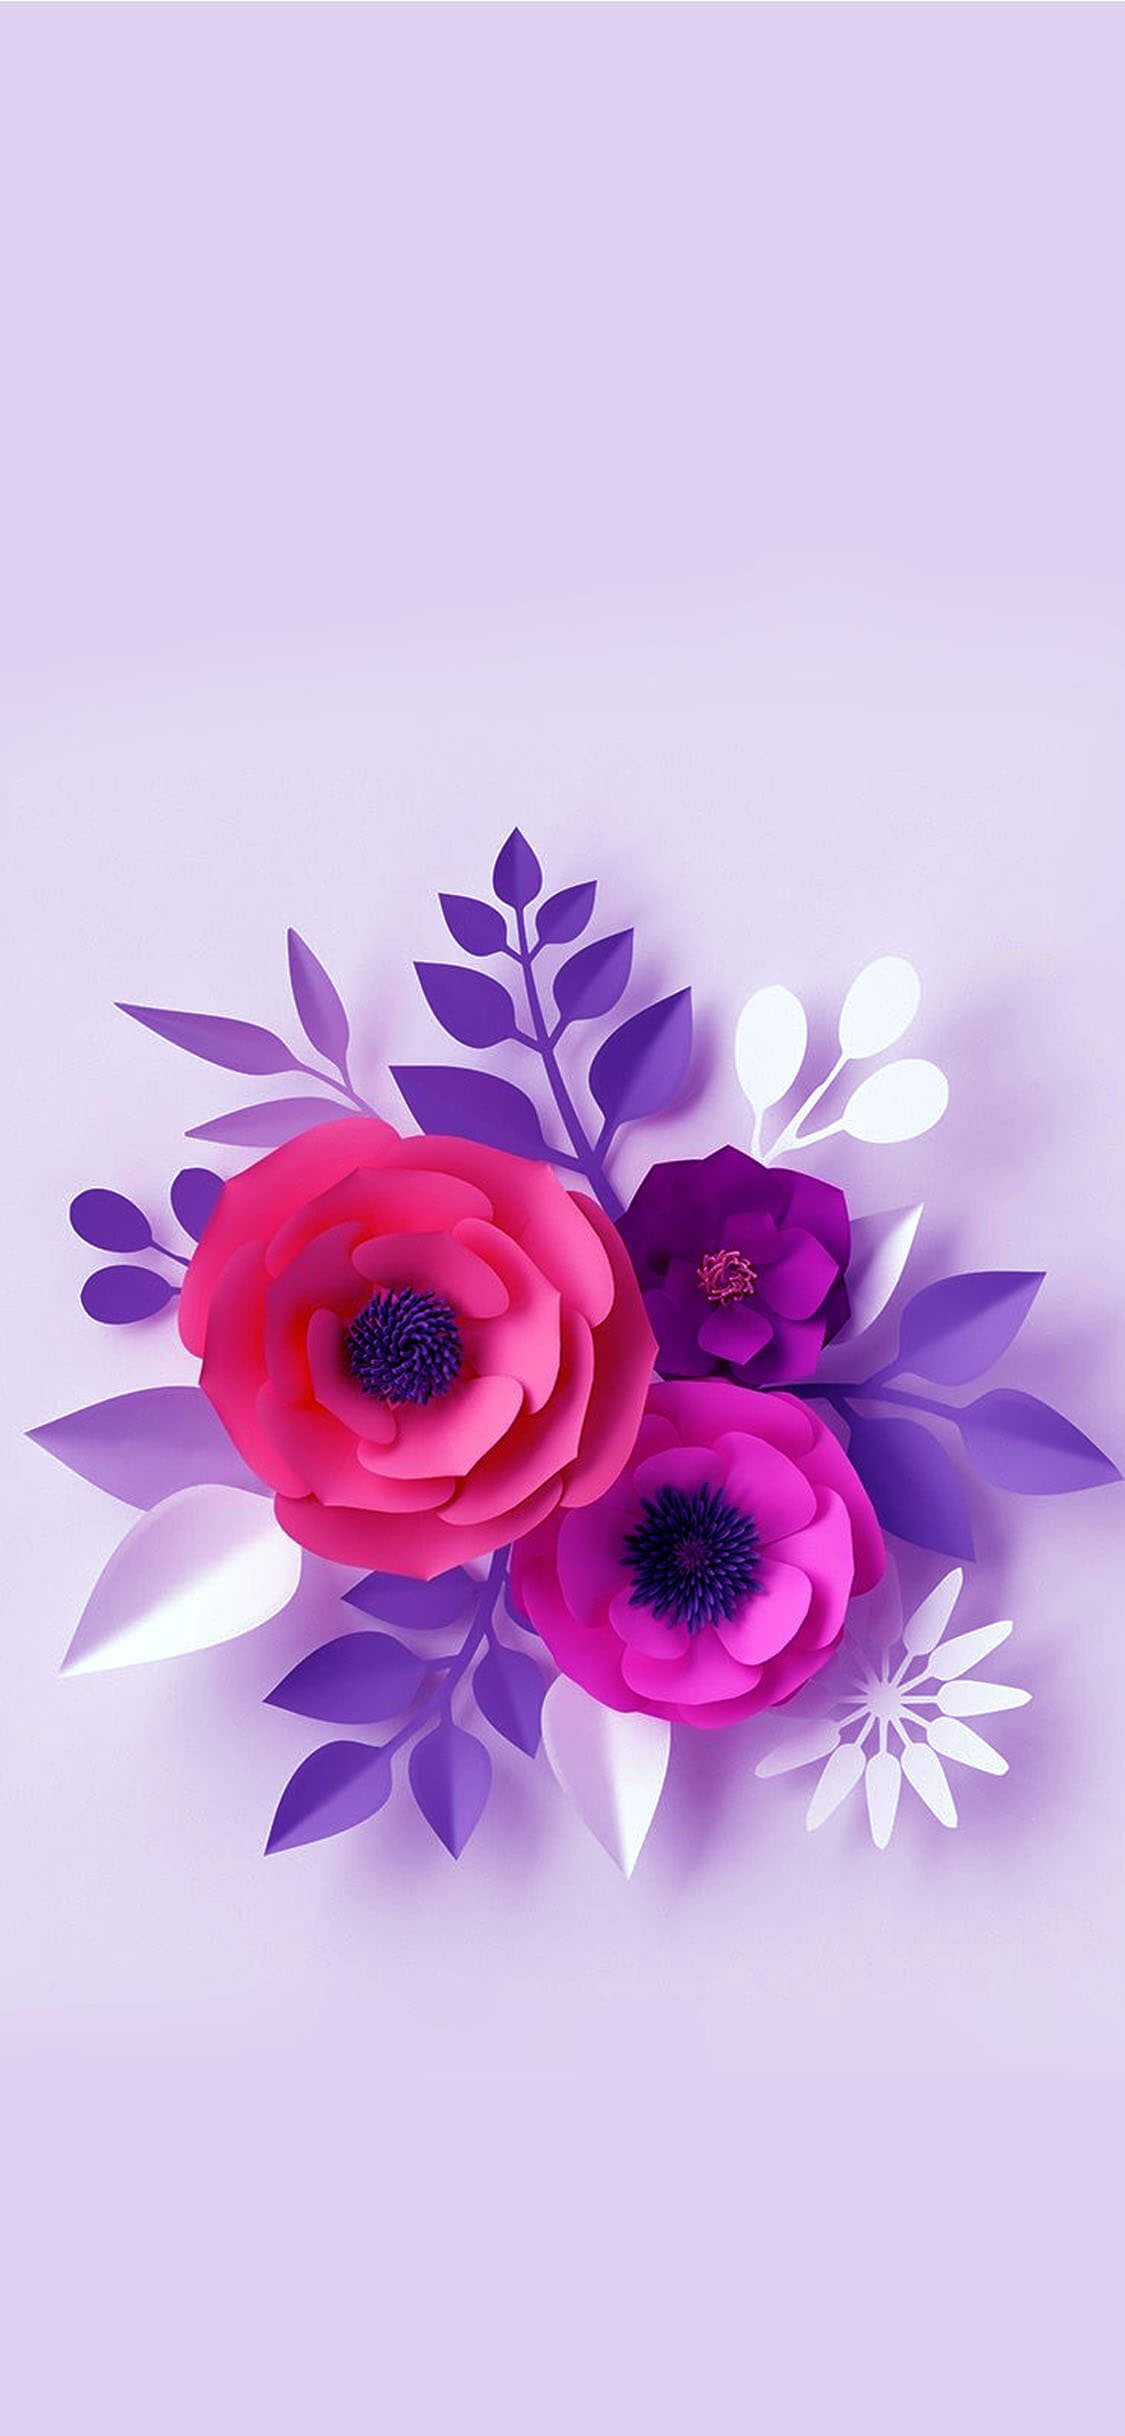 Flowers IPhone Wallpapers, Free Backgrounds for IPhone X, XS, 11 Pro, Lock  Screen Wallpaper 1125x2436